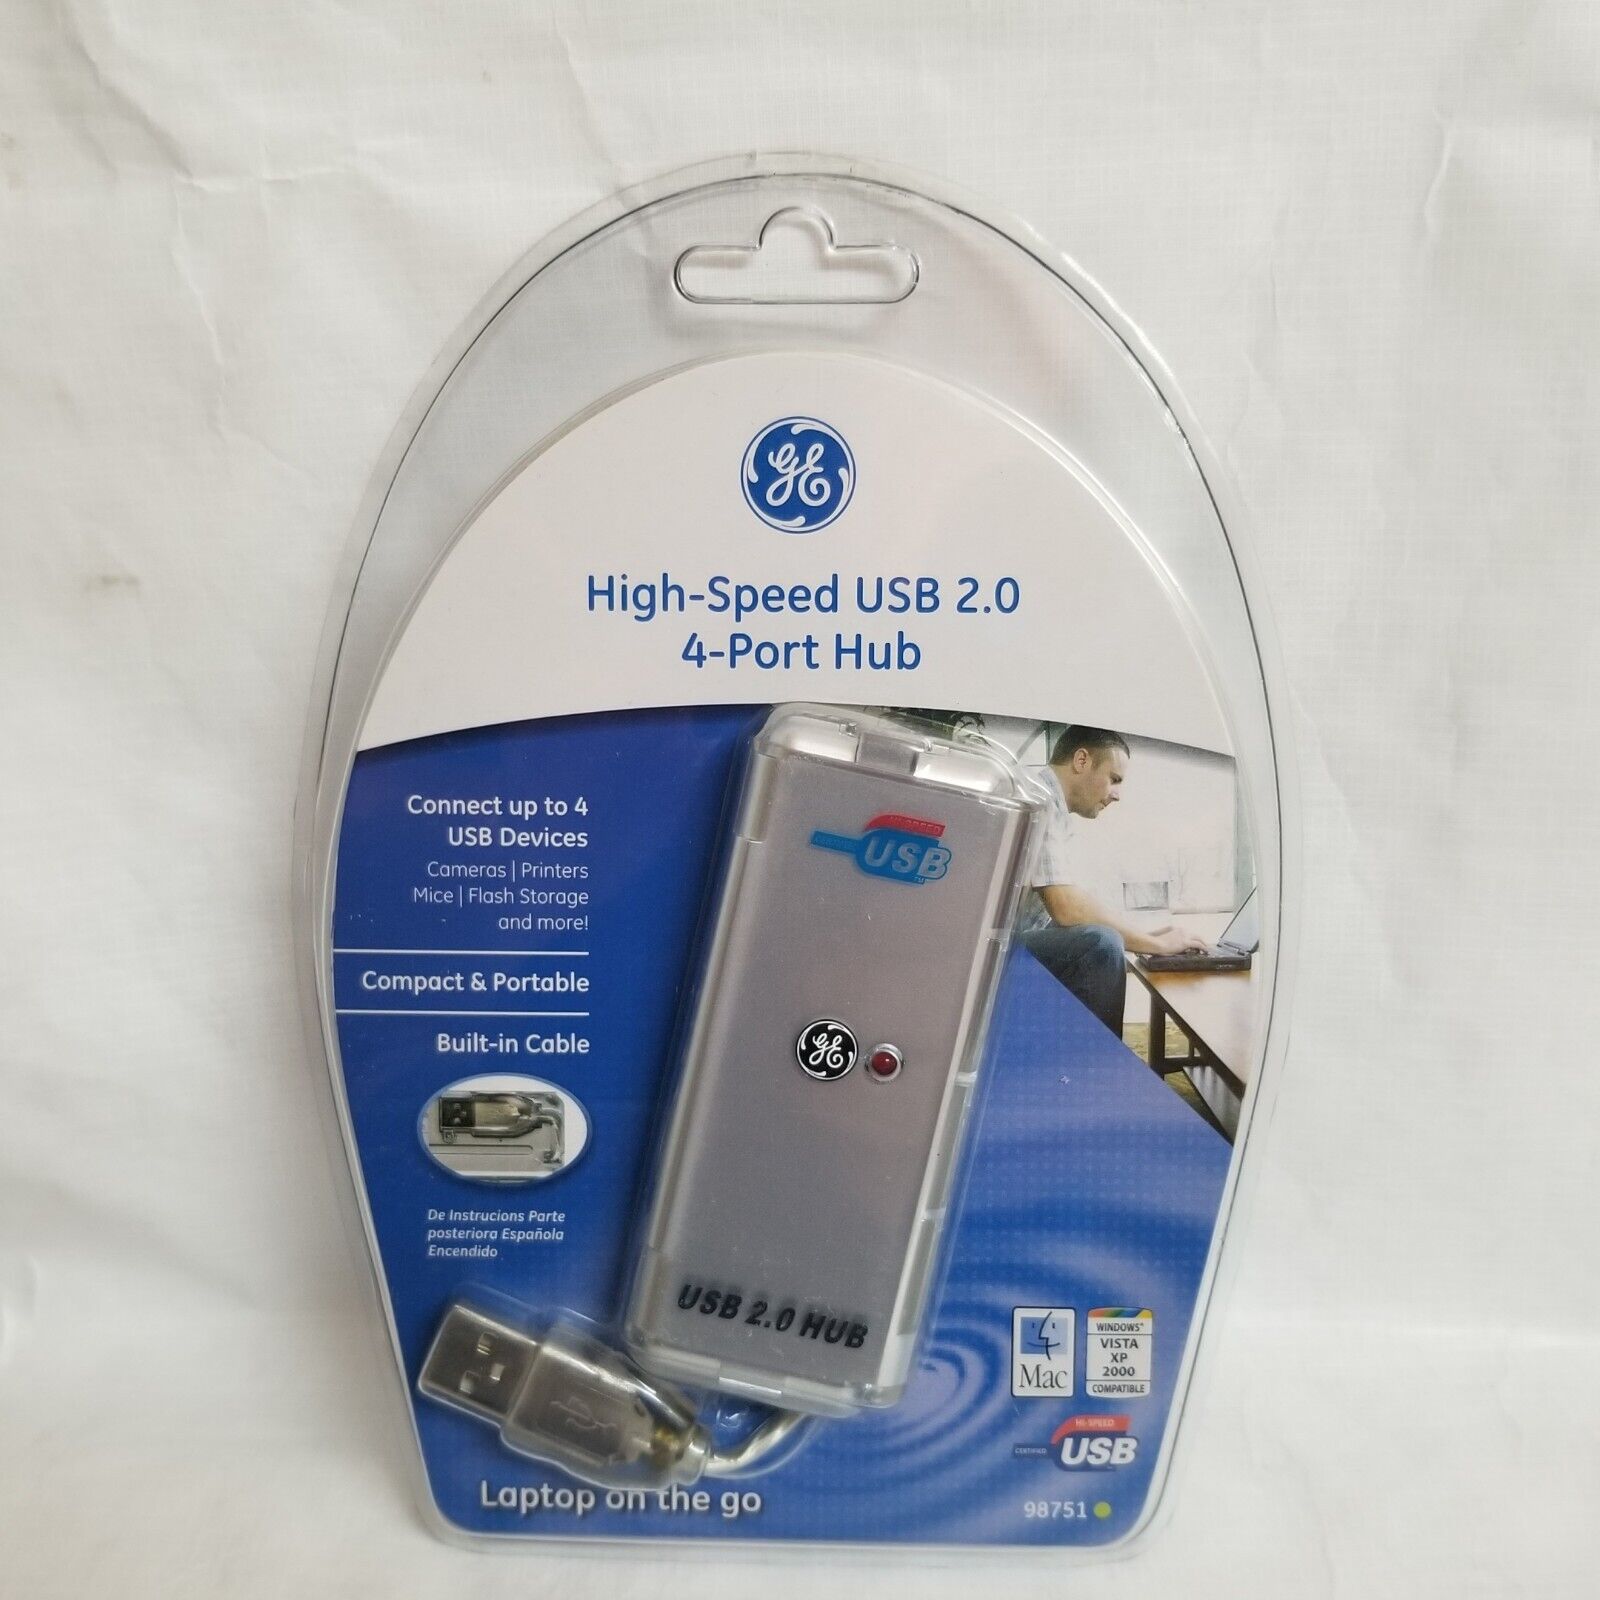 GE High Speed USB 2.0 4-Port Hub #98751 High-Speed Built in Cable Factory Sealed